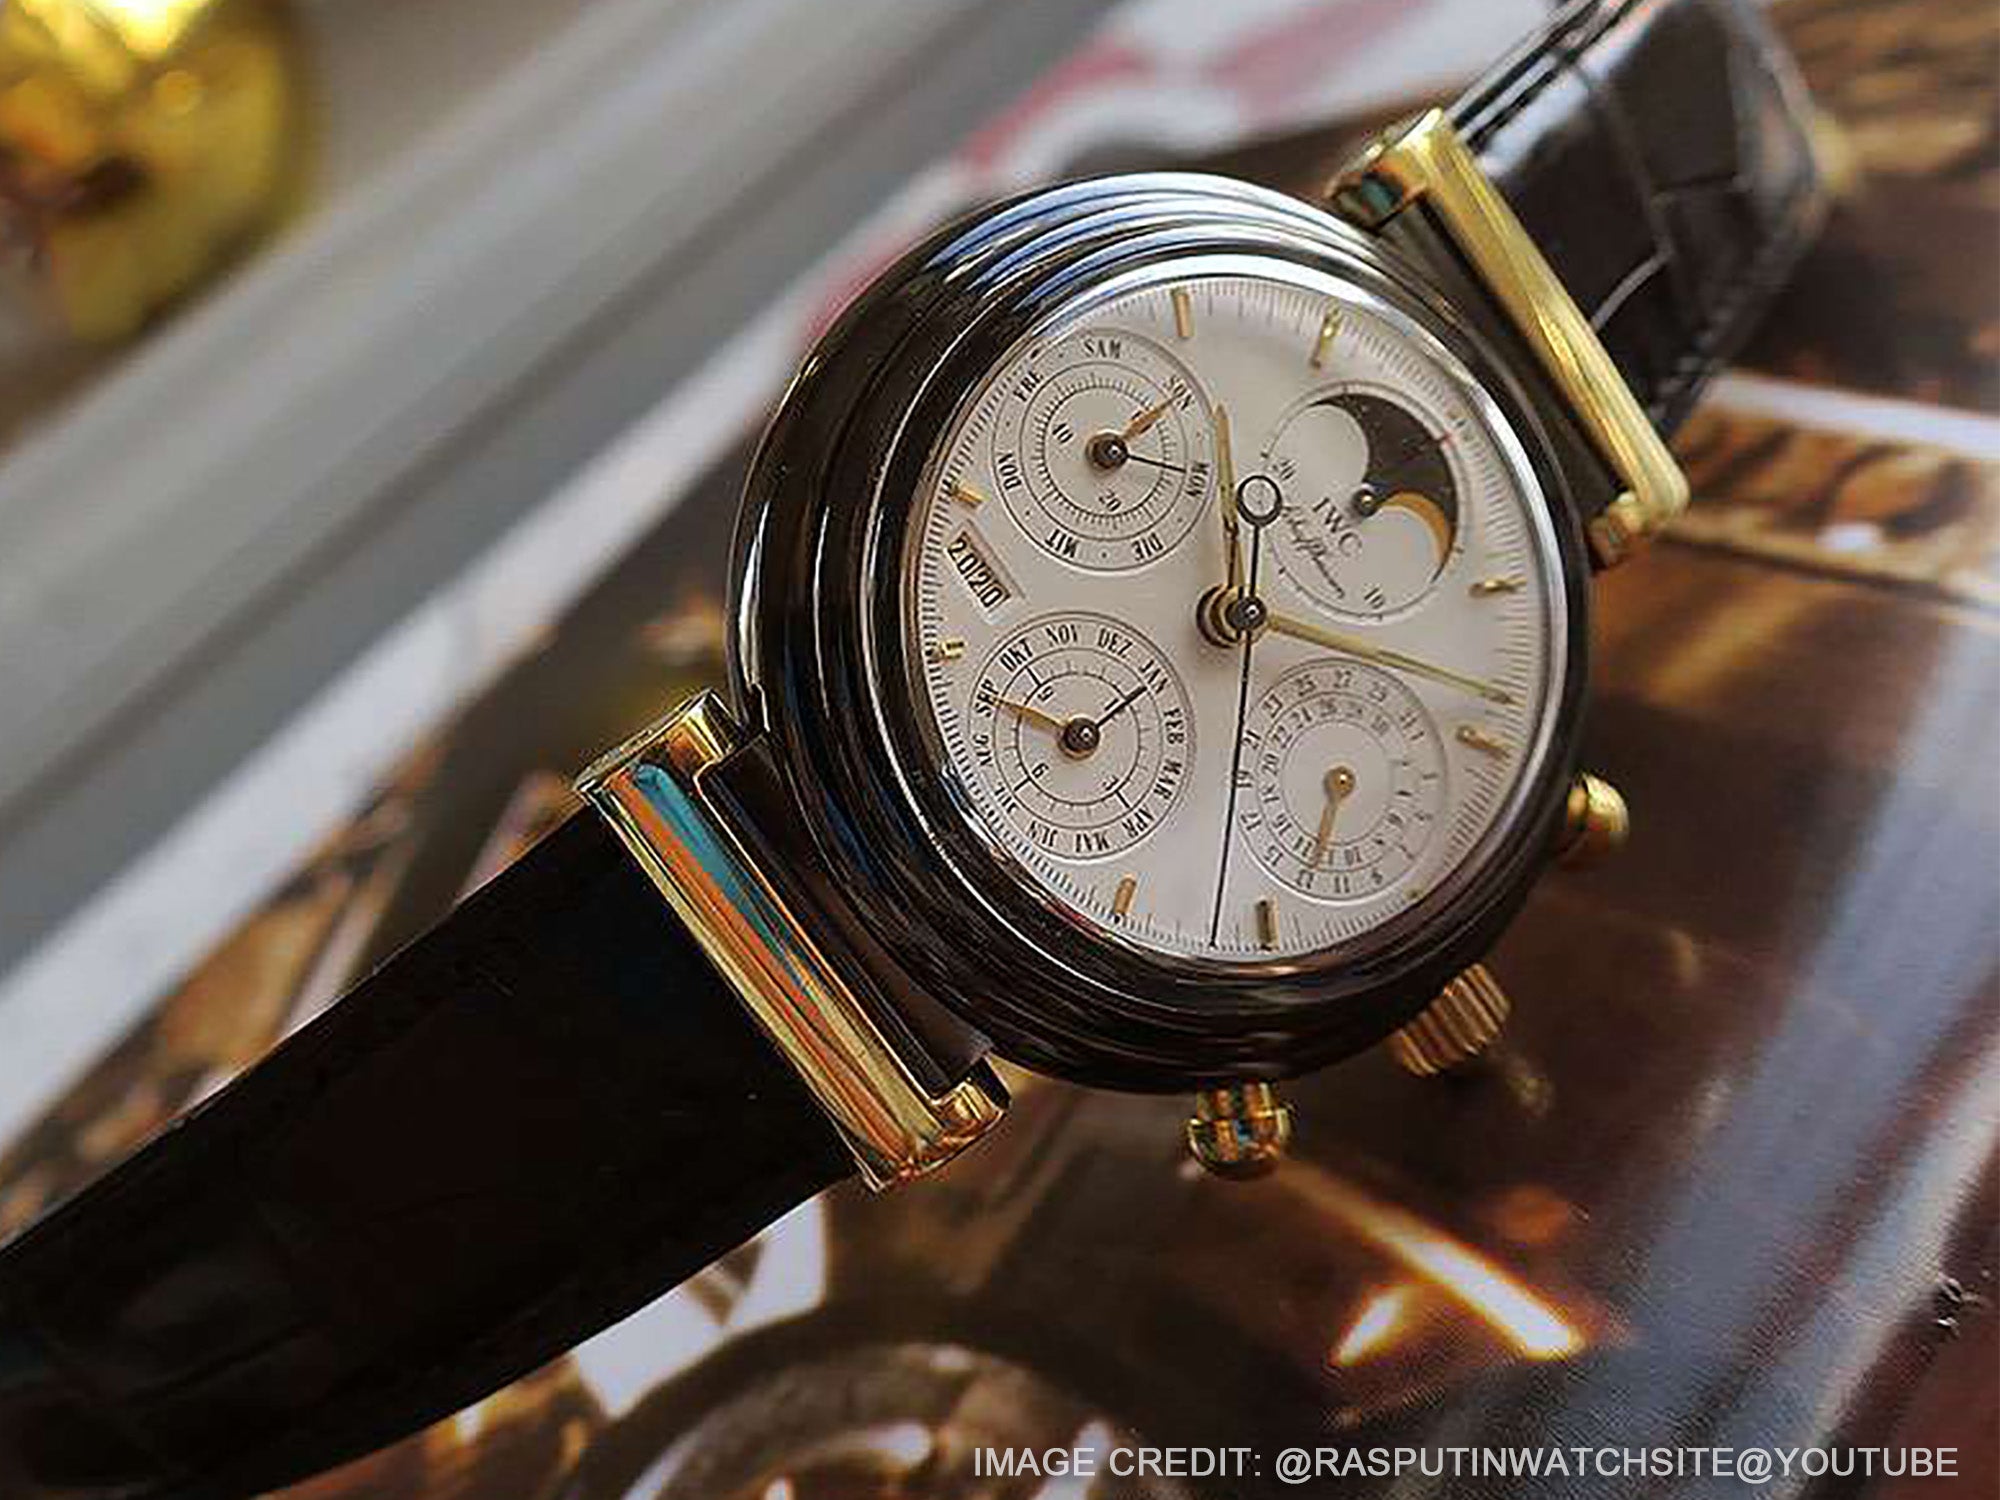 This rare IWC Da Vinci Perpetual has a case of yellow gold and ceramic